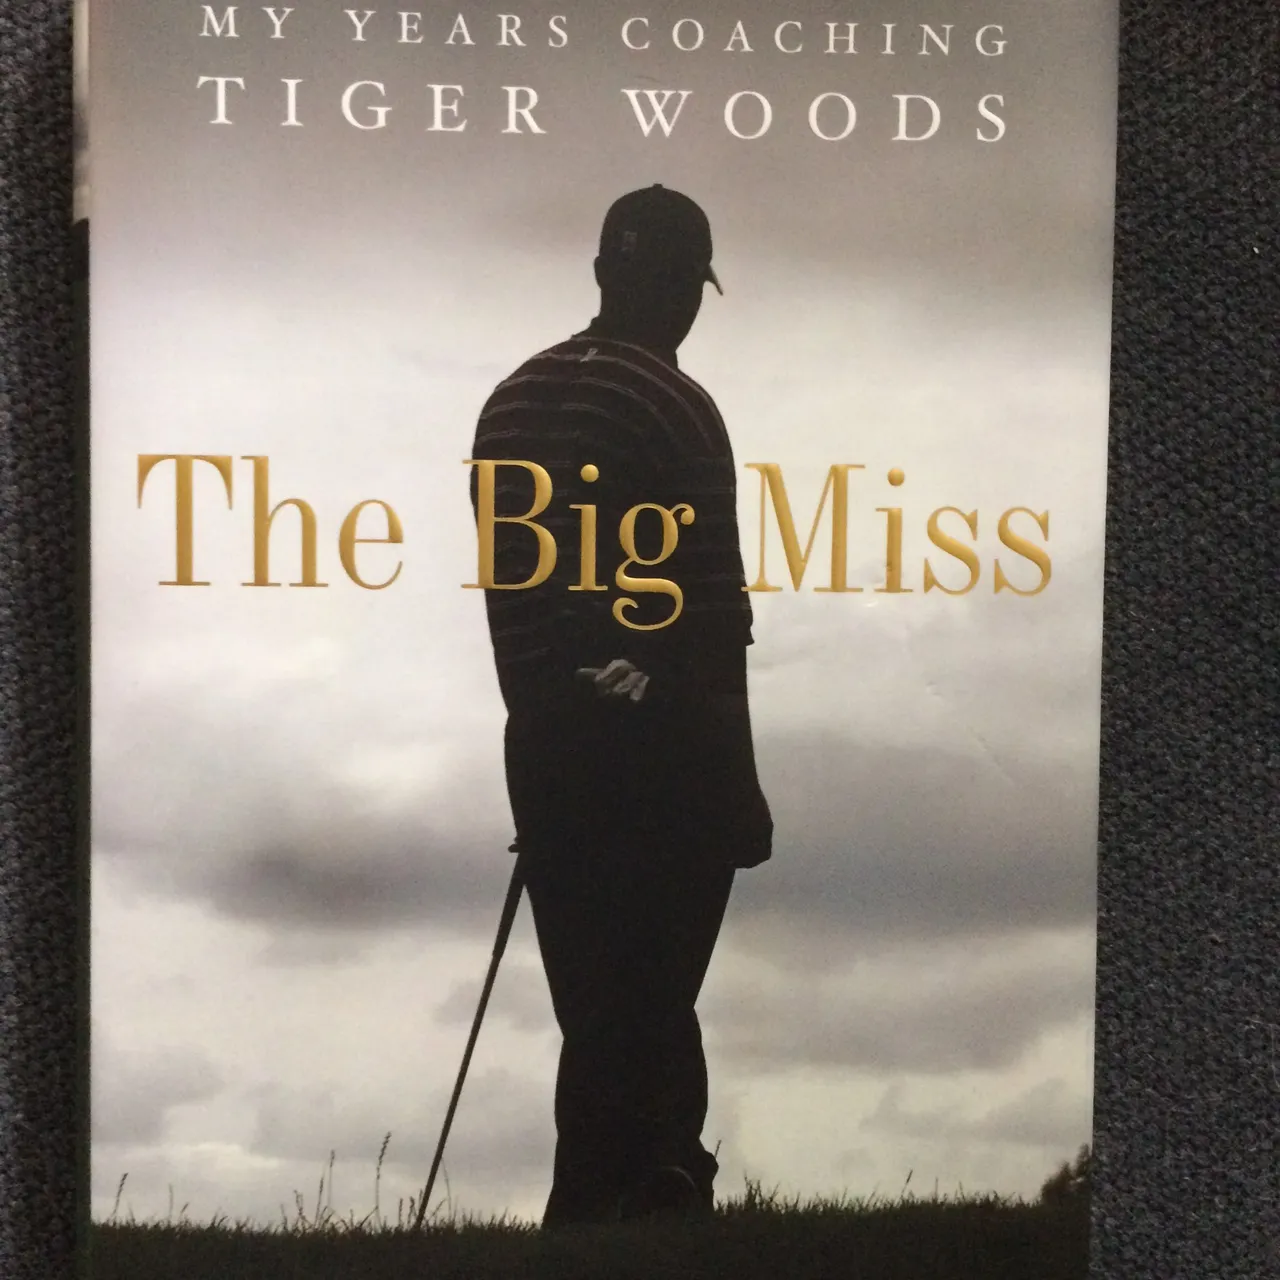 Tiger Woods book photo 1